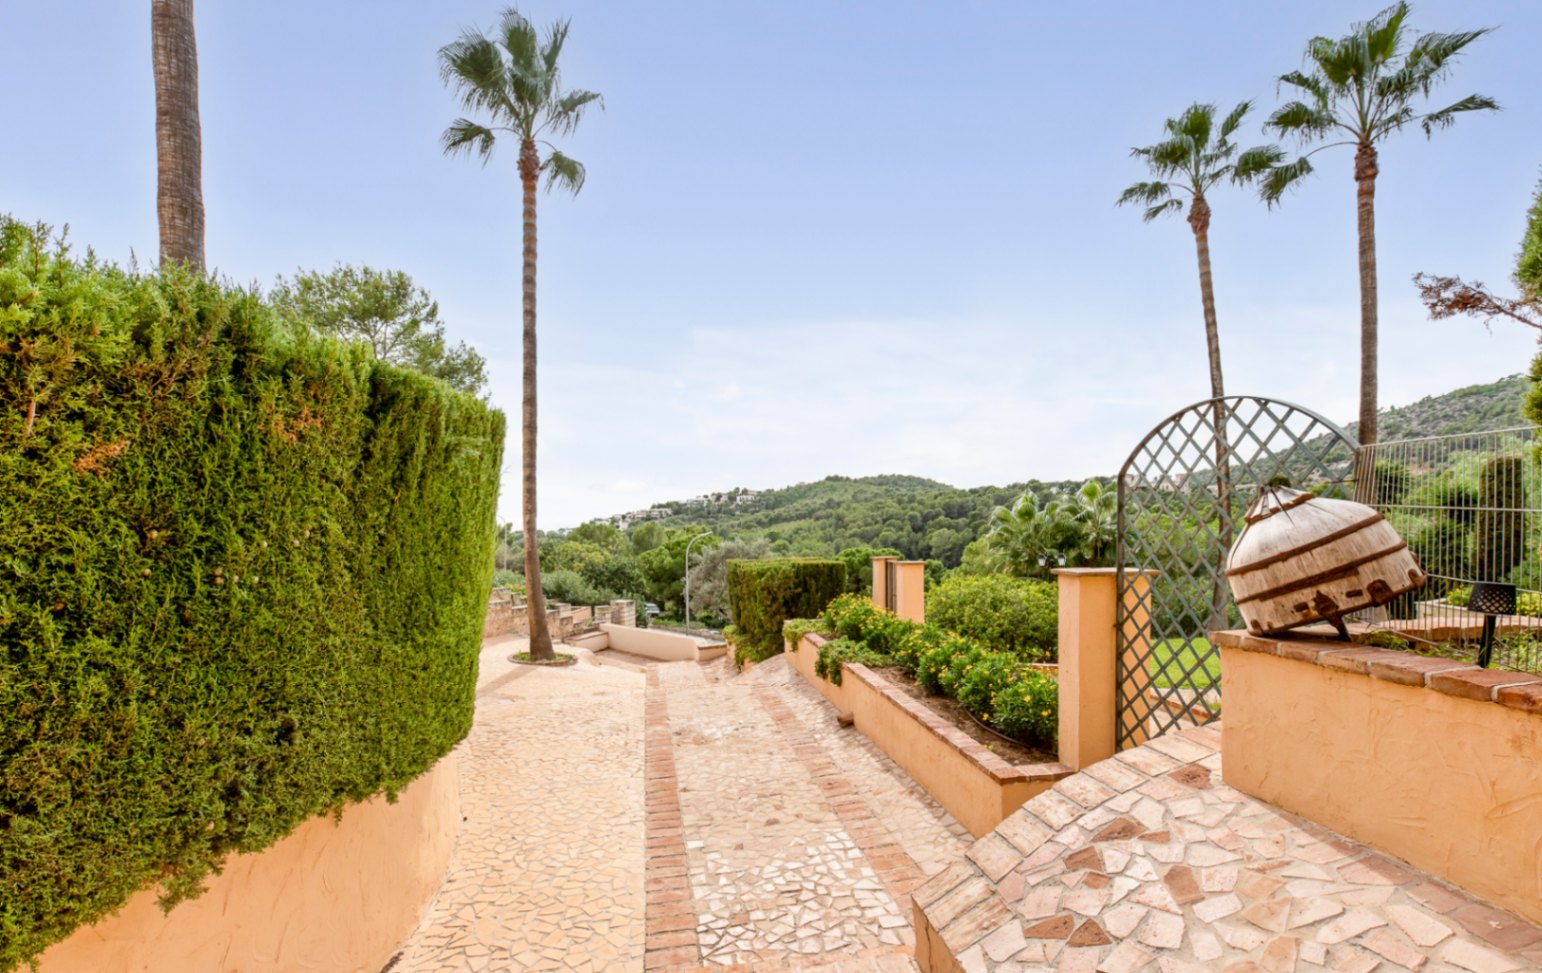 Quality garden apartment with views of Bendinat Castle